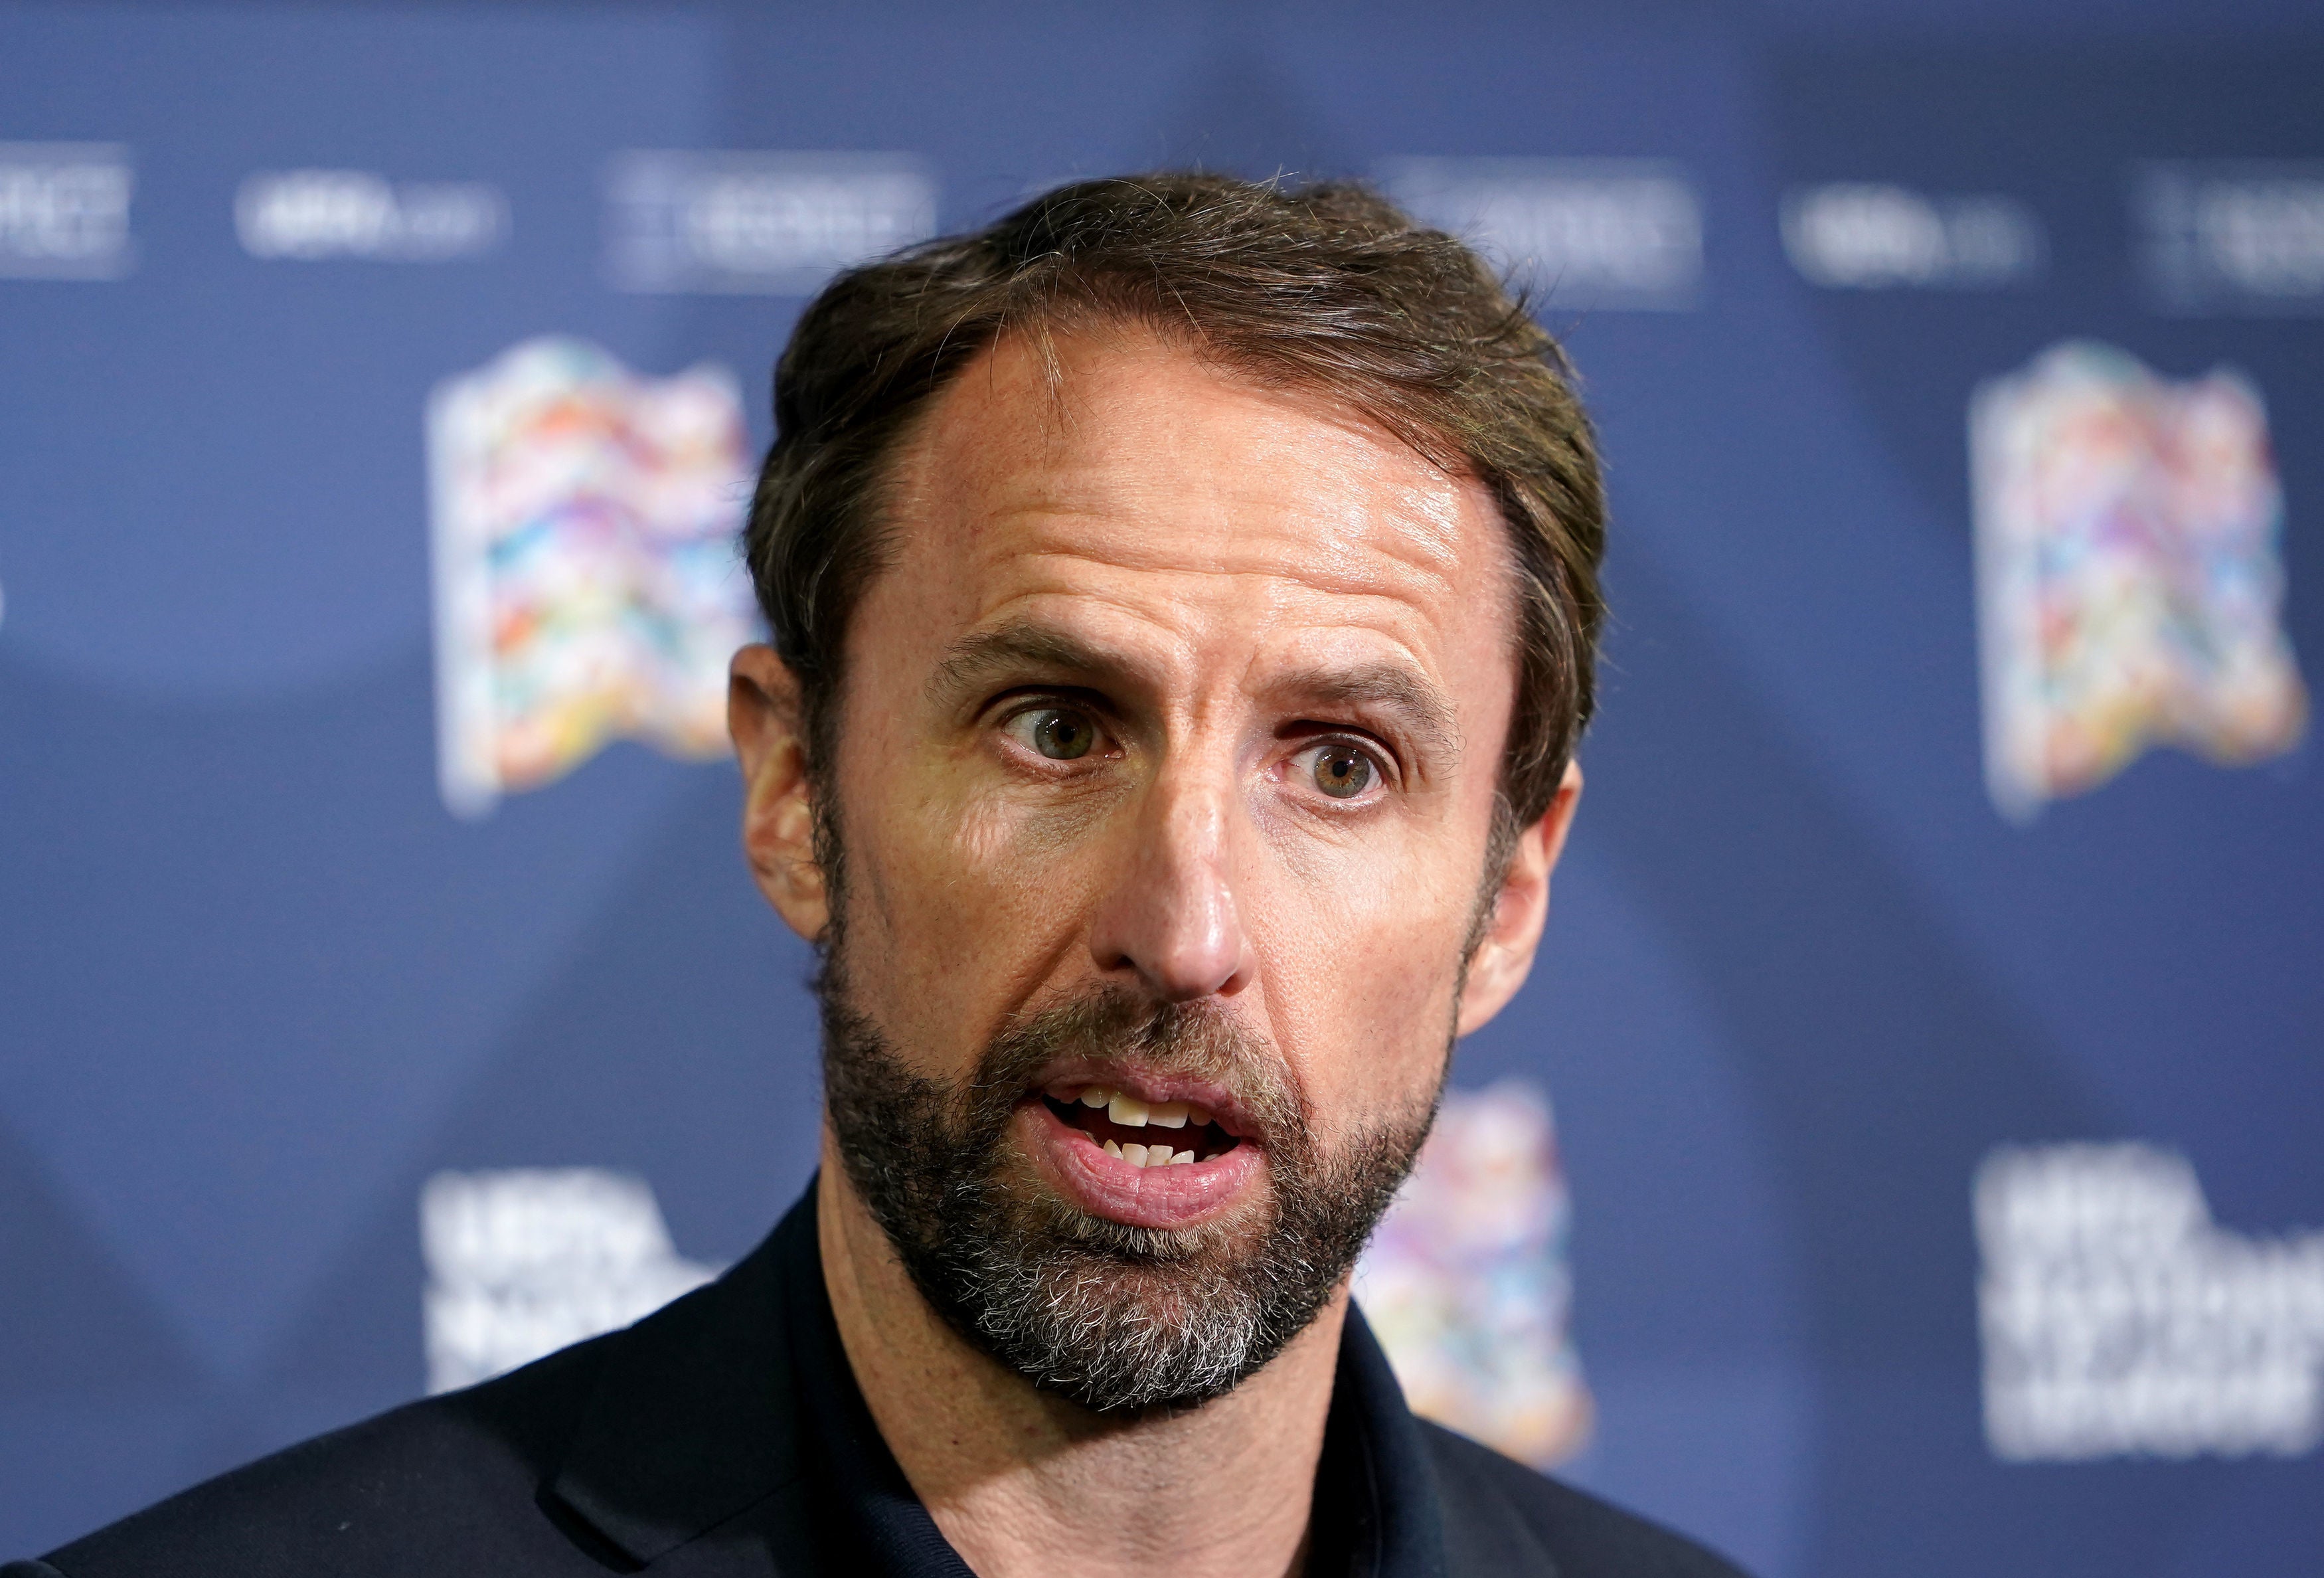 Gareth Southgate has kept faith with his core group